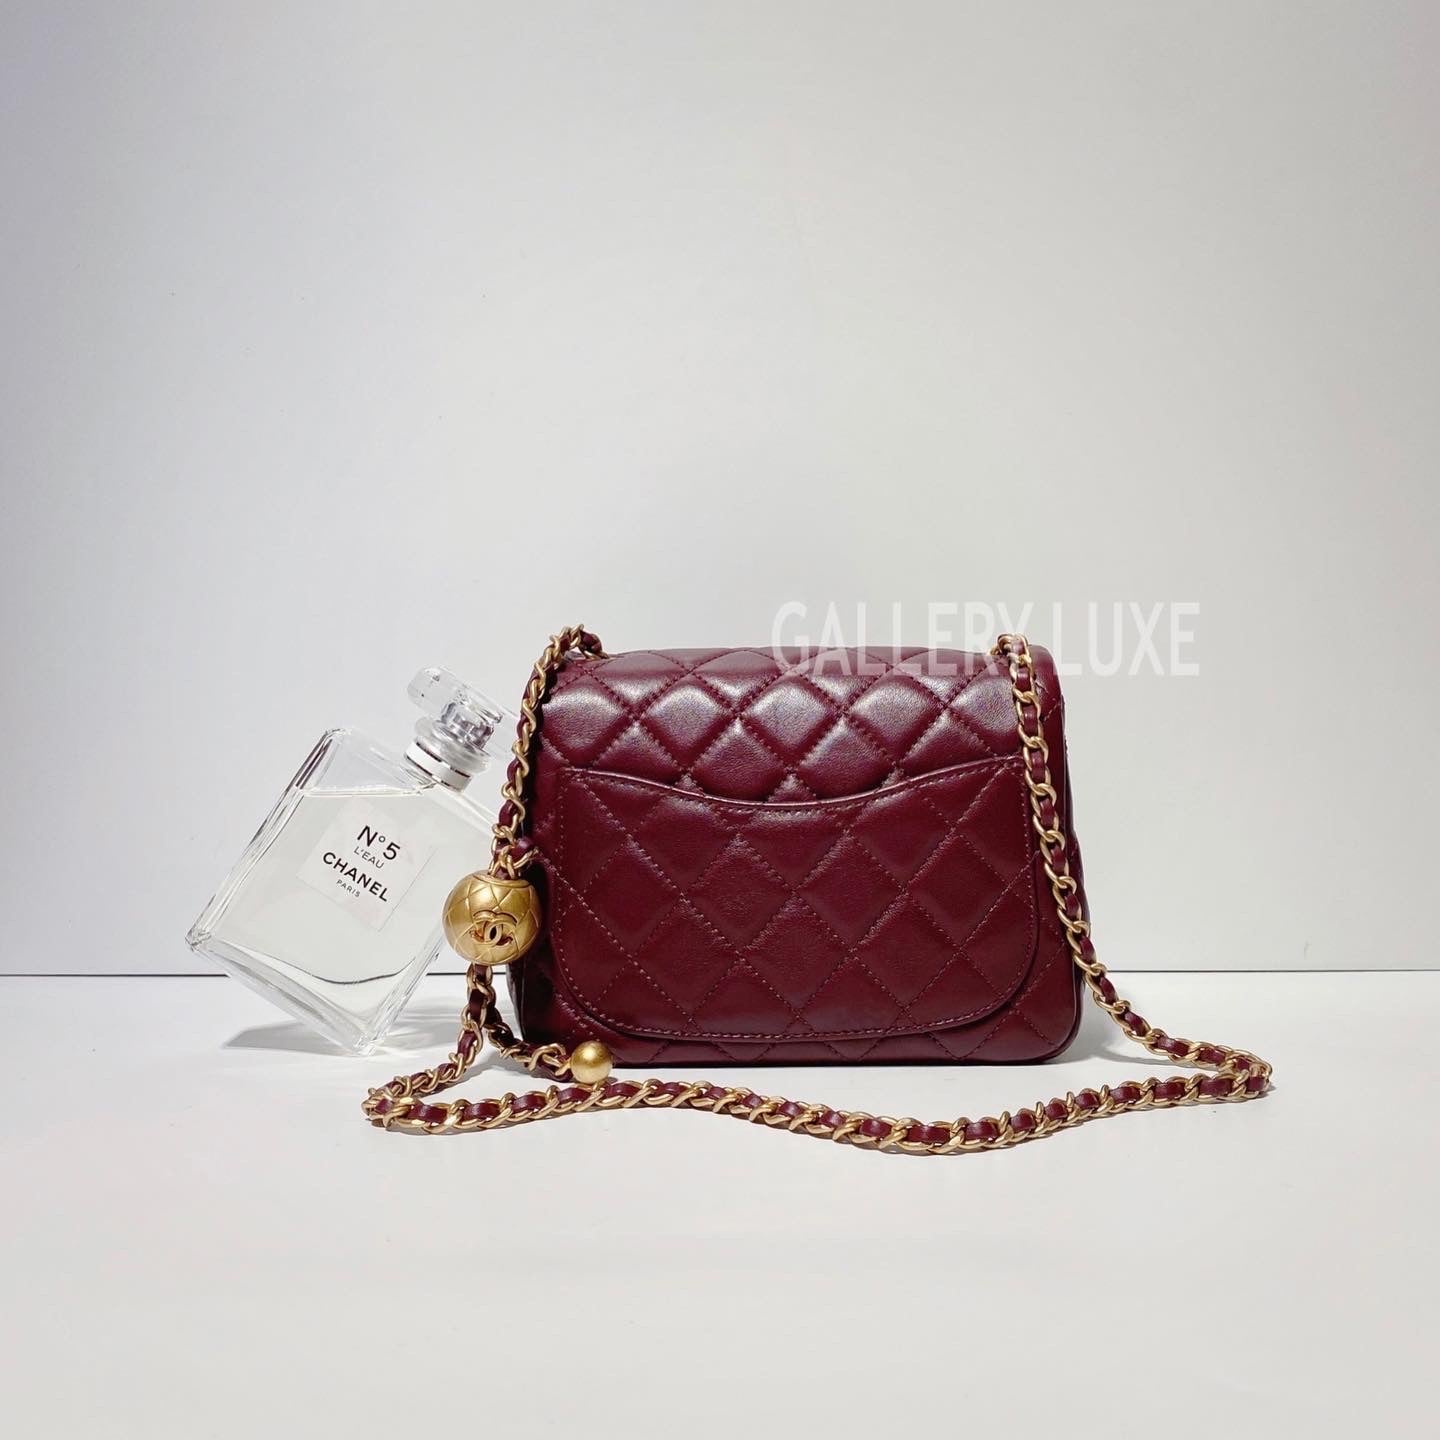 Timeless/classique leather crossbody bag Chanel Purple in Leather - 25511232